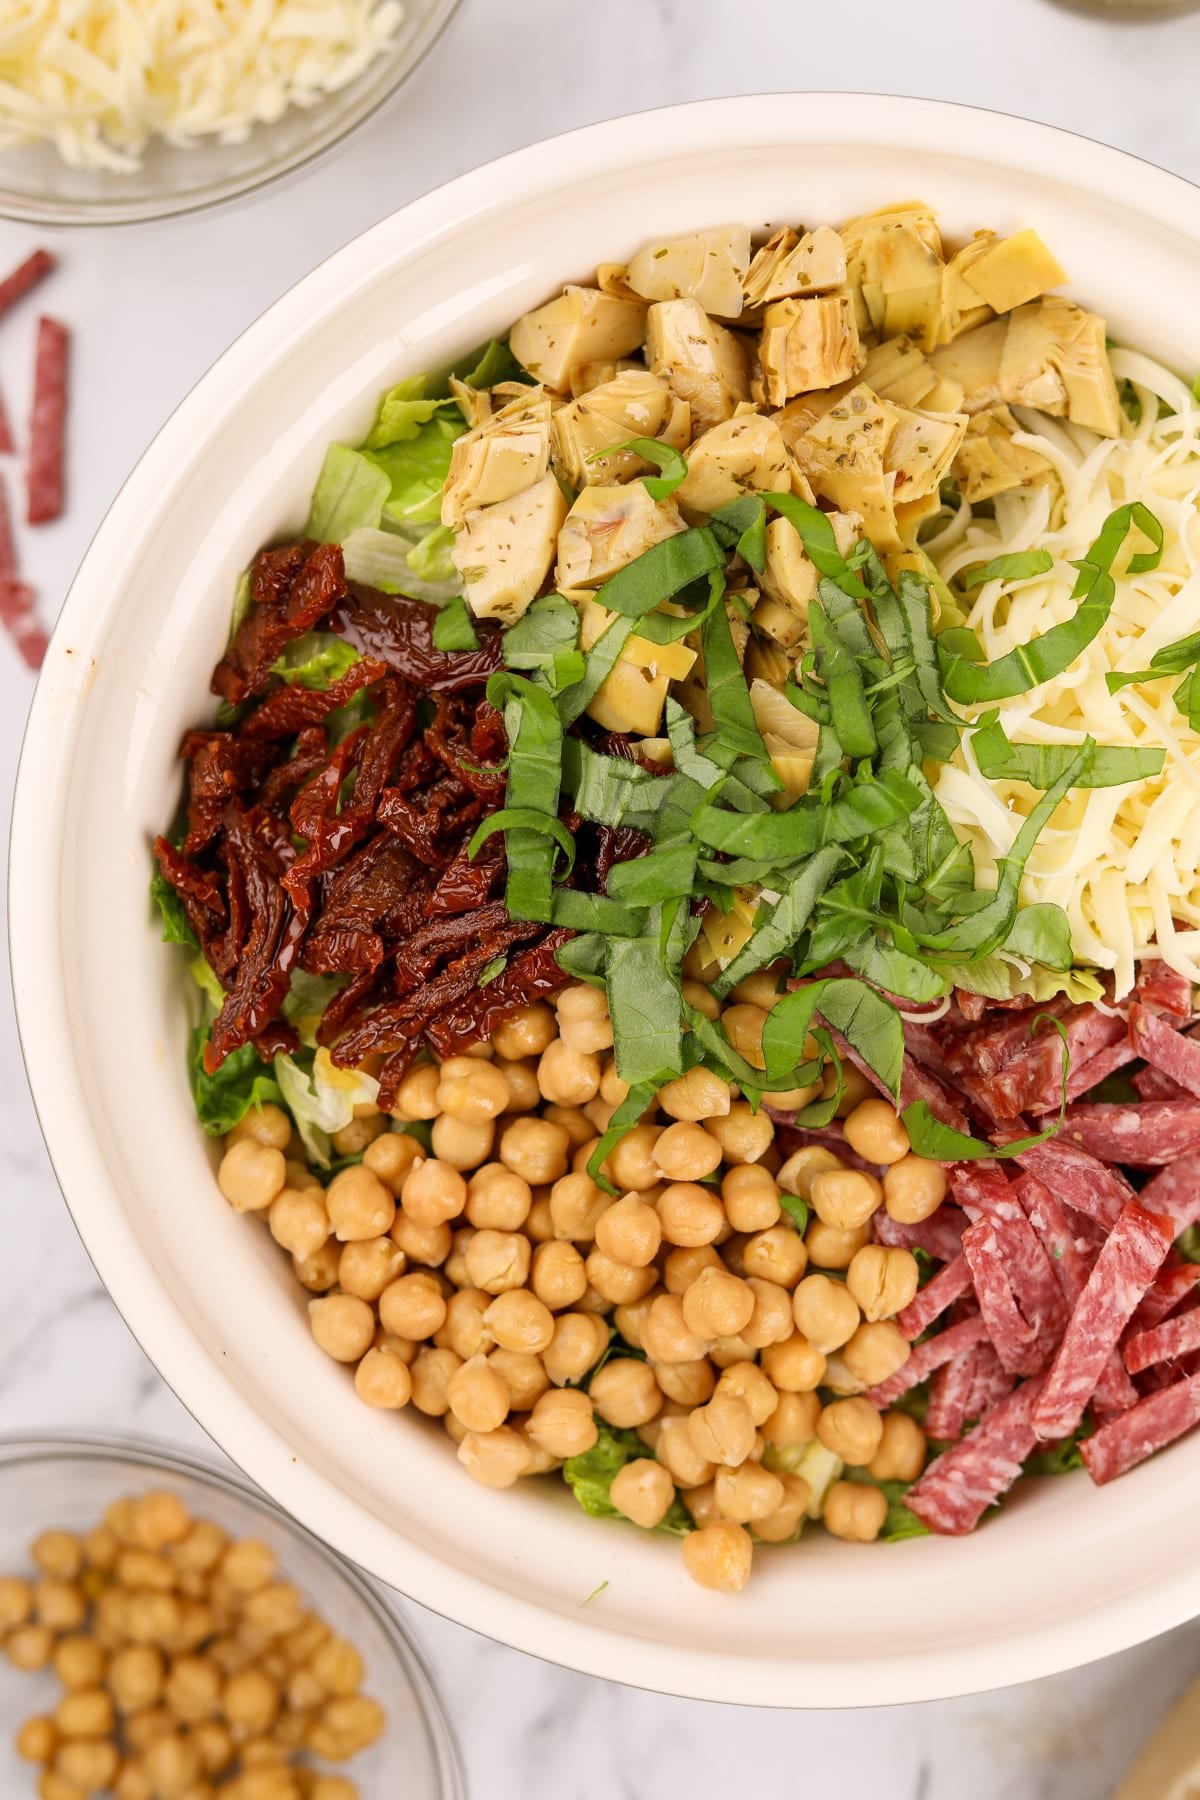 A large bowl of salad, topped with sections of chickpeas, sundried tomatoes, basil, artichokes, mozza, and salami.